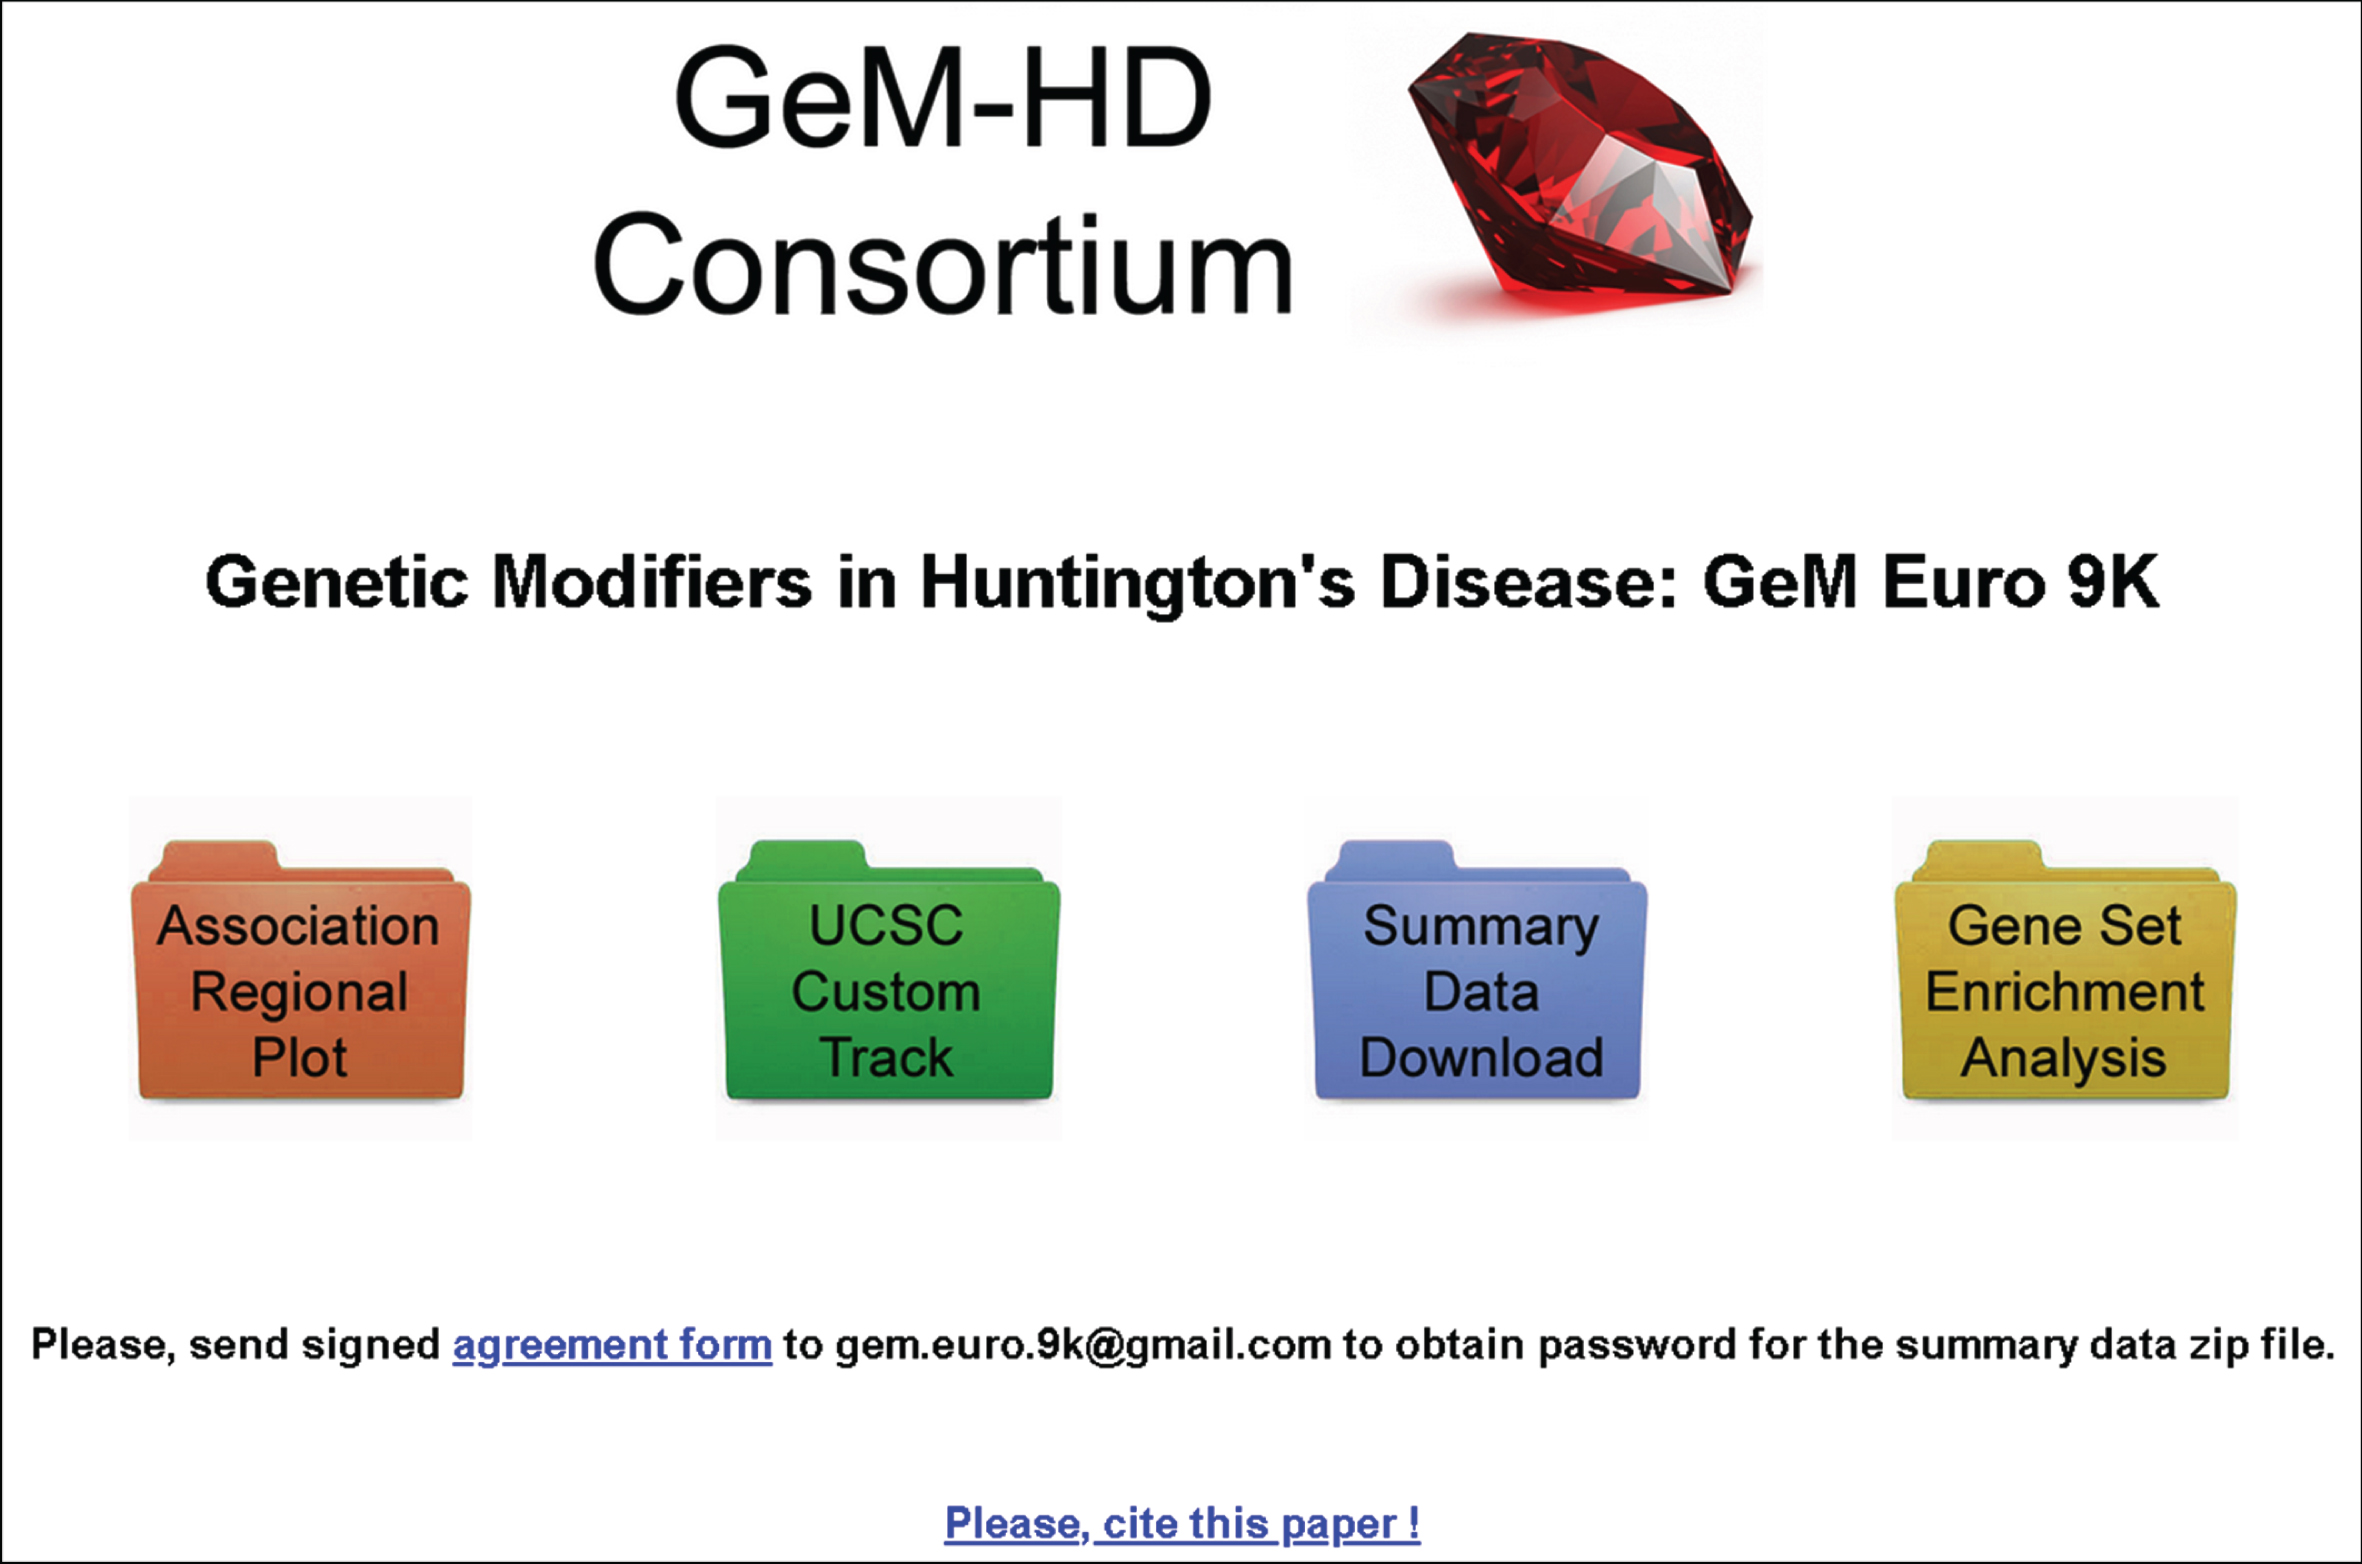 GeM-HD Euro 9K website. The opening page of the GeM-HD Euro 9K website, which can be accessed through HDinHD (https://www.hdinhd.org/), provides links to regional association plots by gene or SNP, to the University of California at Santa Cruz Genome Browser with a custom track for the GWA data, to a summary data download and to a utility that performs Gene Set Enrichment Analysis for user-specified custom gene sets.